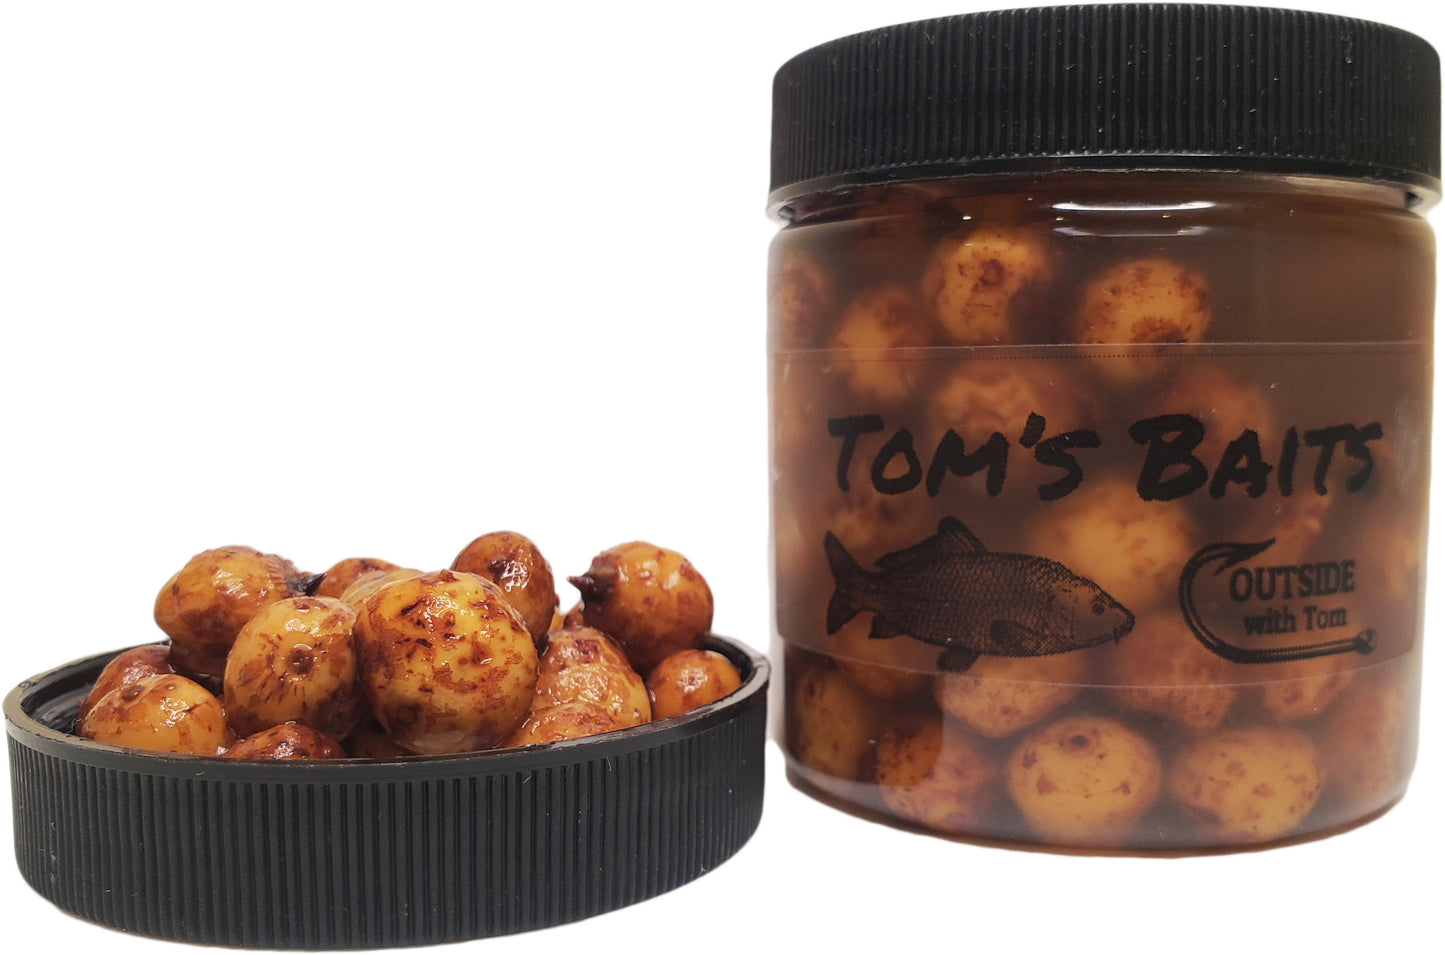 Flavored Tiger Nuts - Hook Baits for Carp Fishing *New*